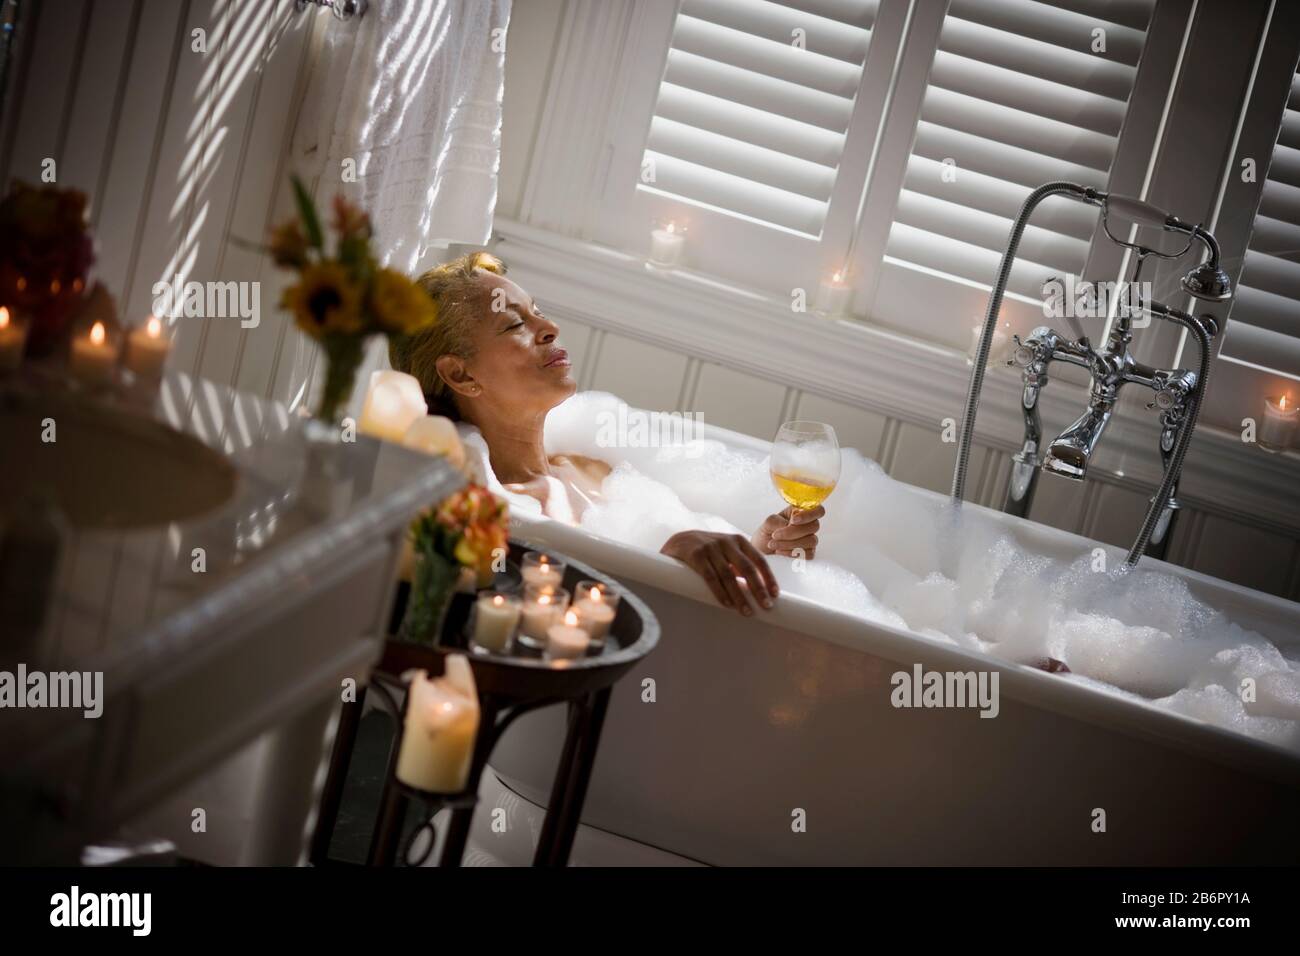 Mid-adult woman relaxing in a bubble bath with a glass of wine and surrounded by candles. Stock Photo